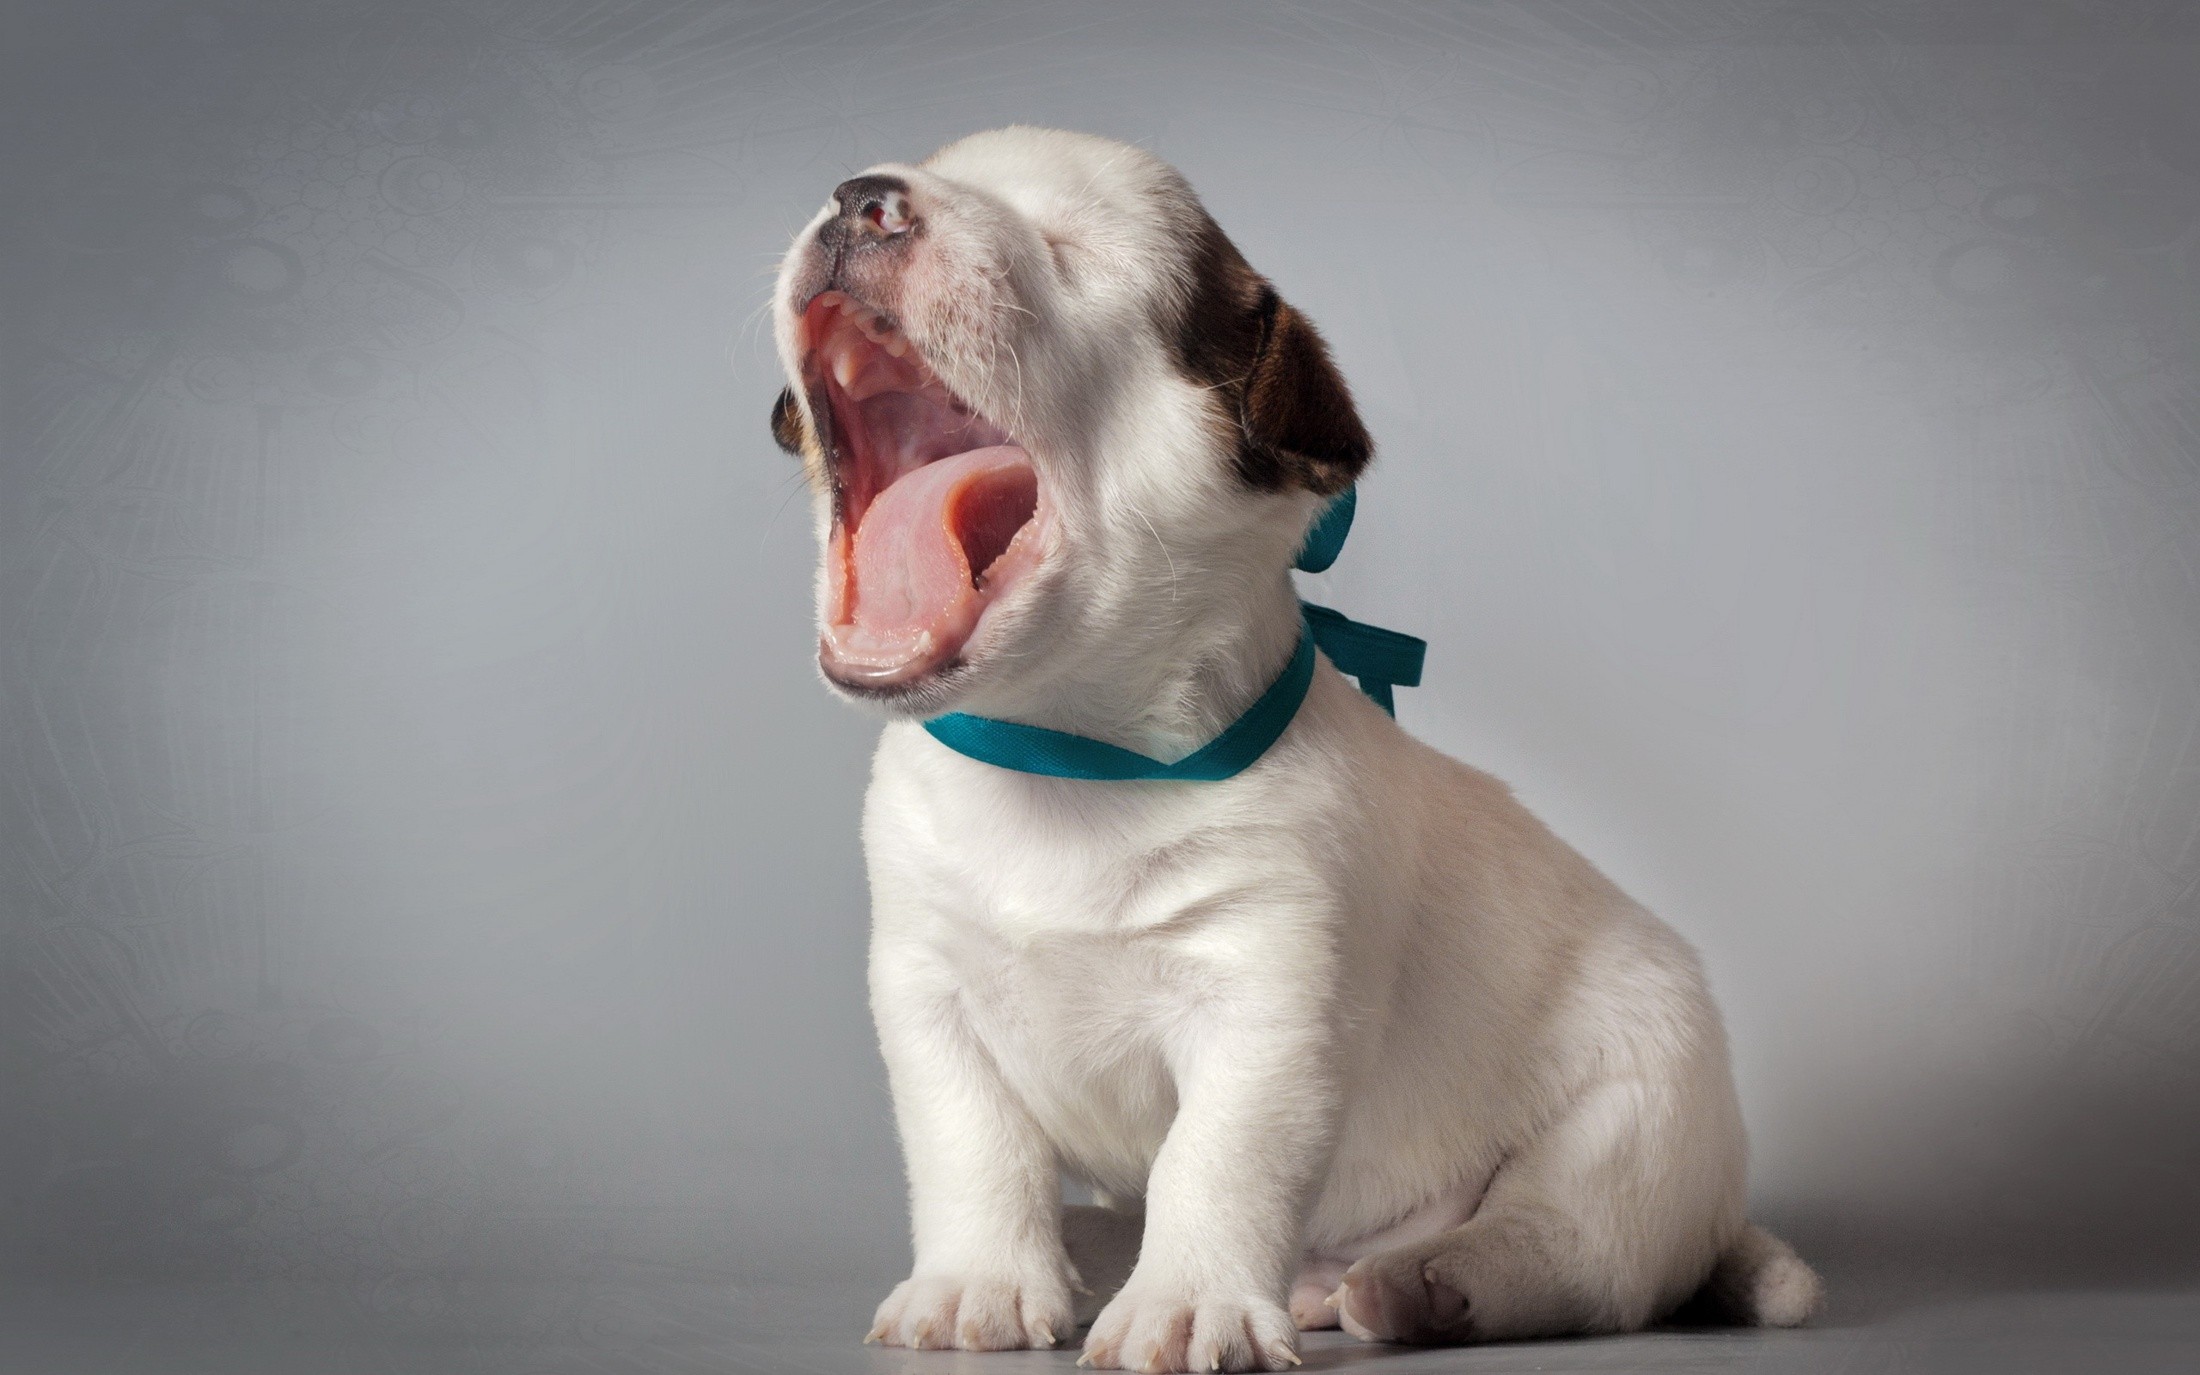 General 2200x1375 puppies dog animals simple background yawning mammals gray background